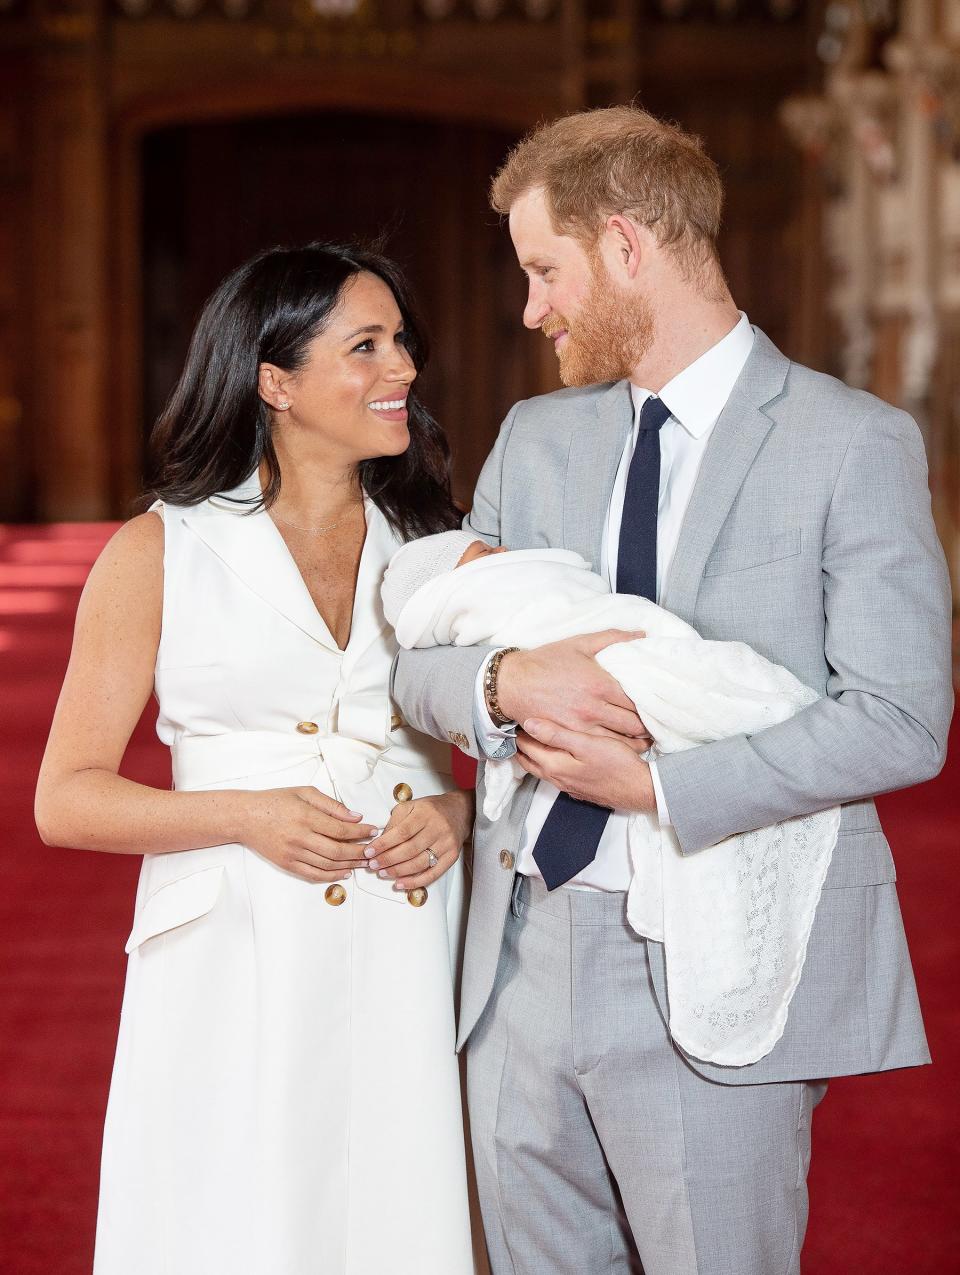 Archie's Christening Date Revealed! Here's When We'll See Meghan Markle and Prince Harry's Son